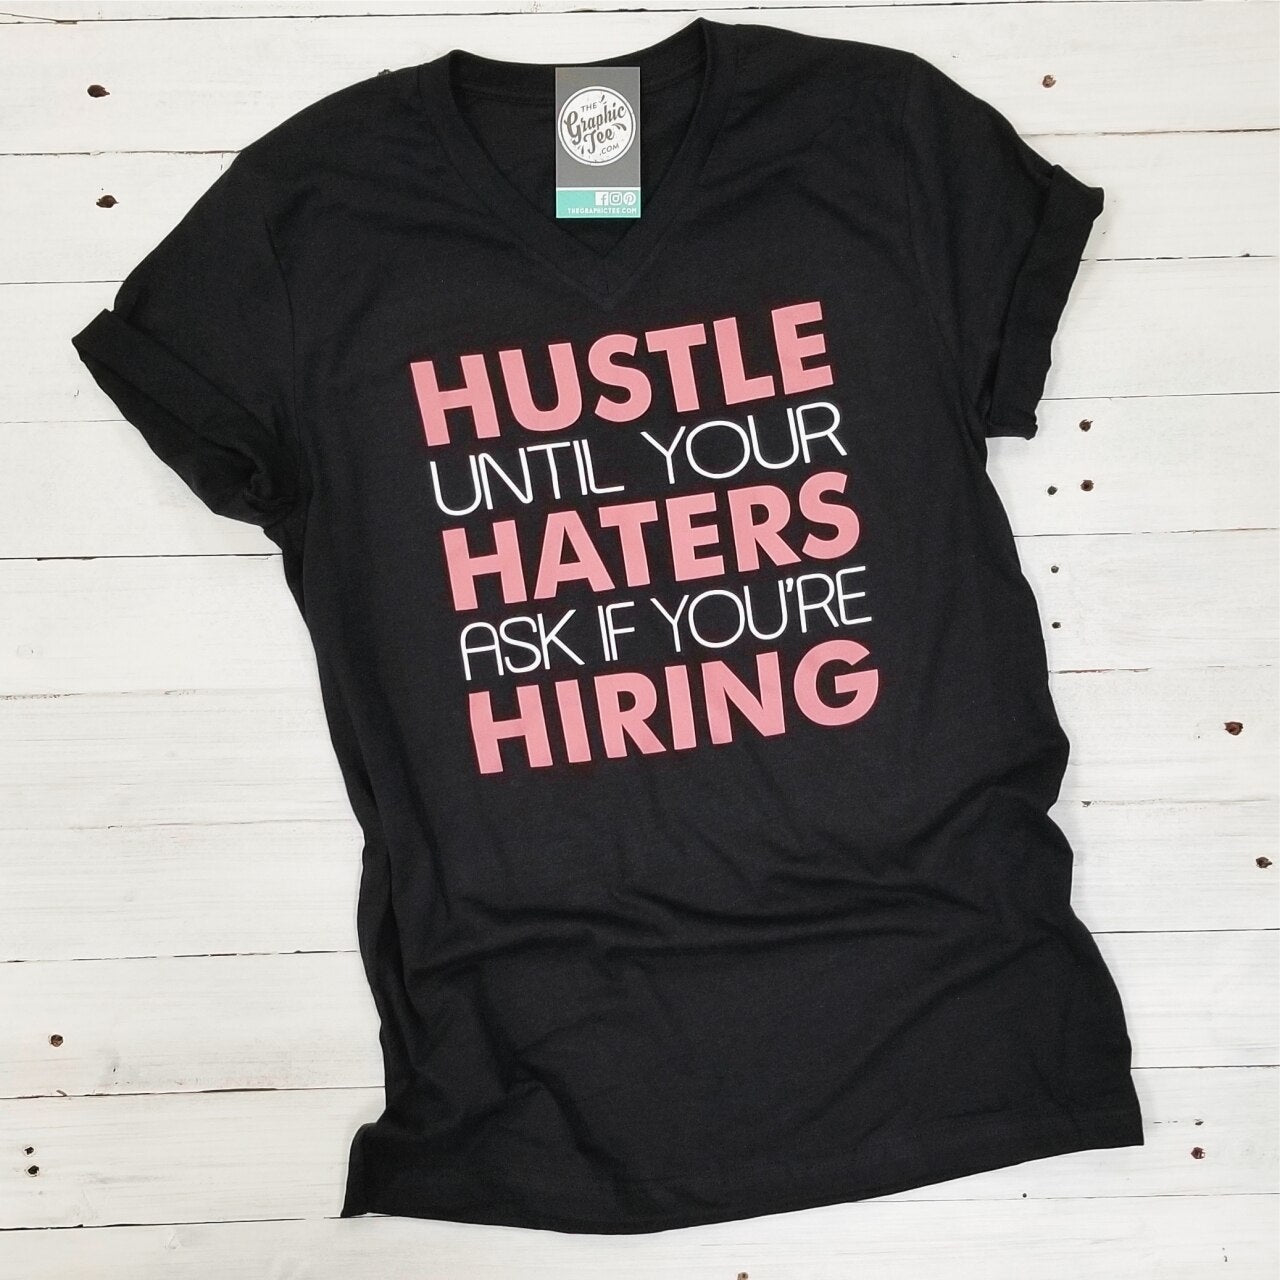 Hustle Until Your Haters Ask If You're Hiring - V-Neck Tee - The Graphic Tee